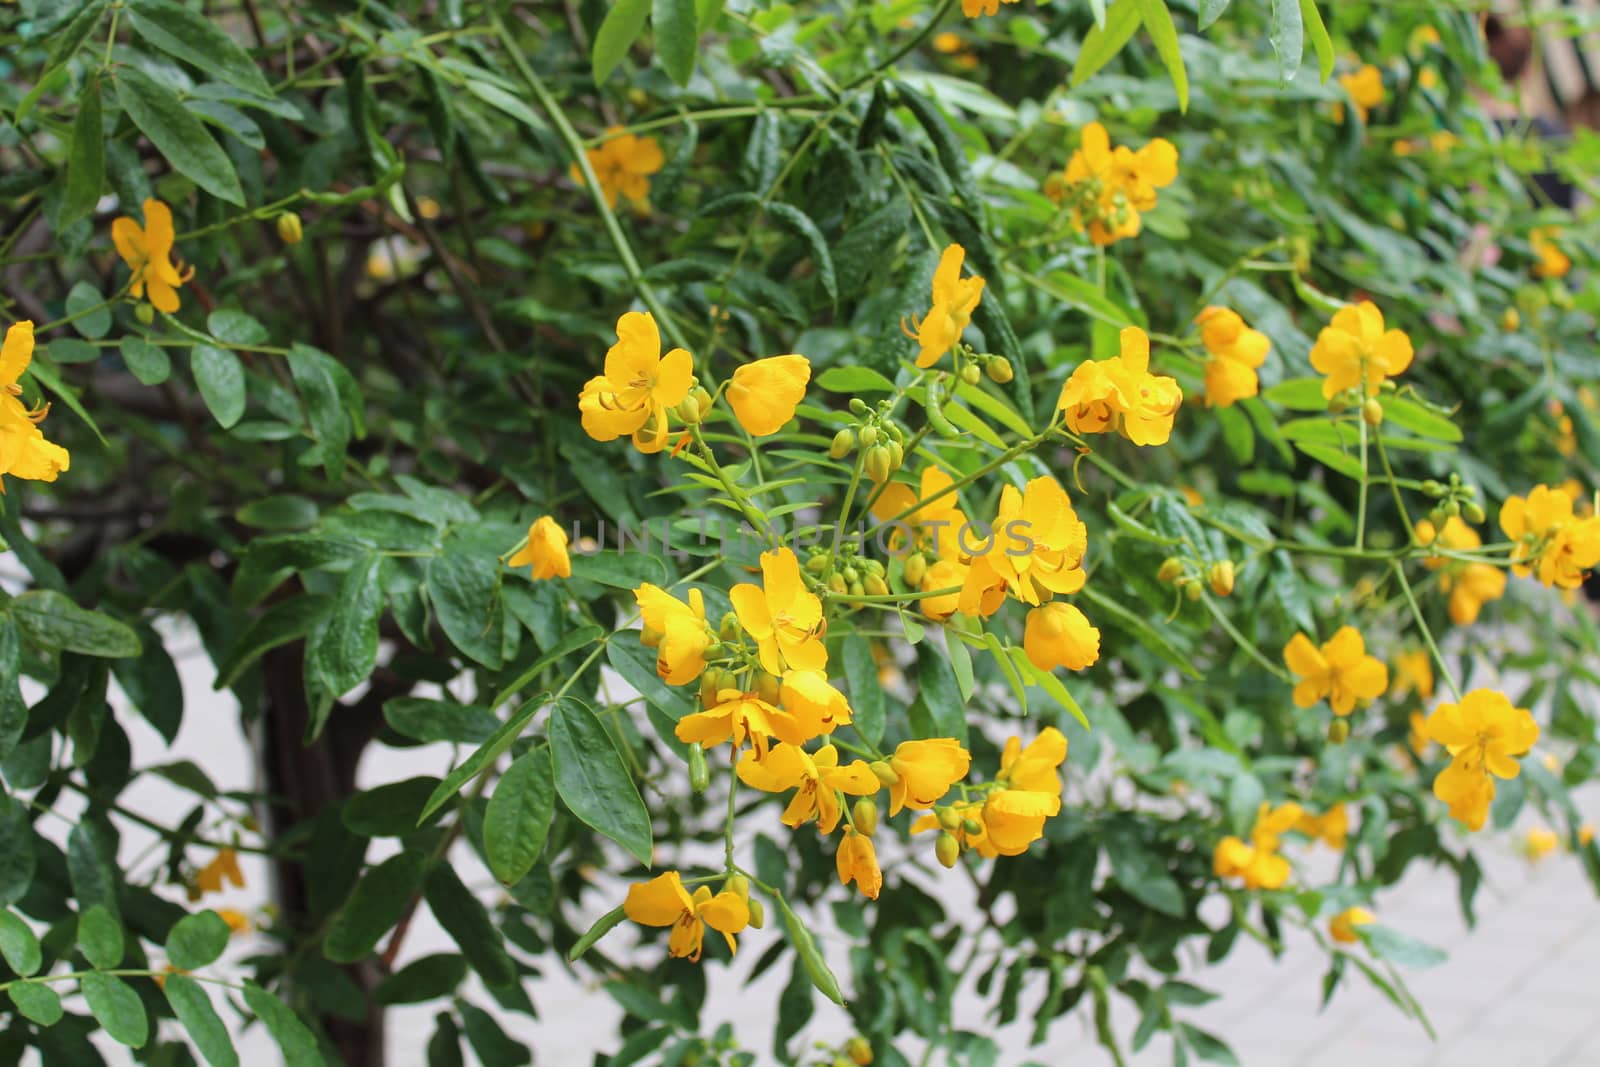 a plant with yellow blossoms by martina_unbehauen